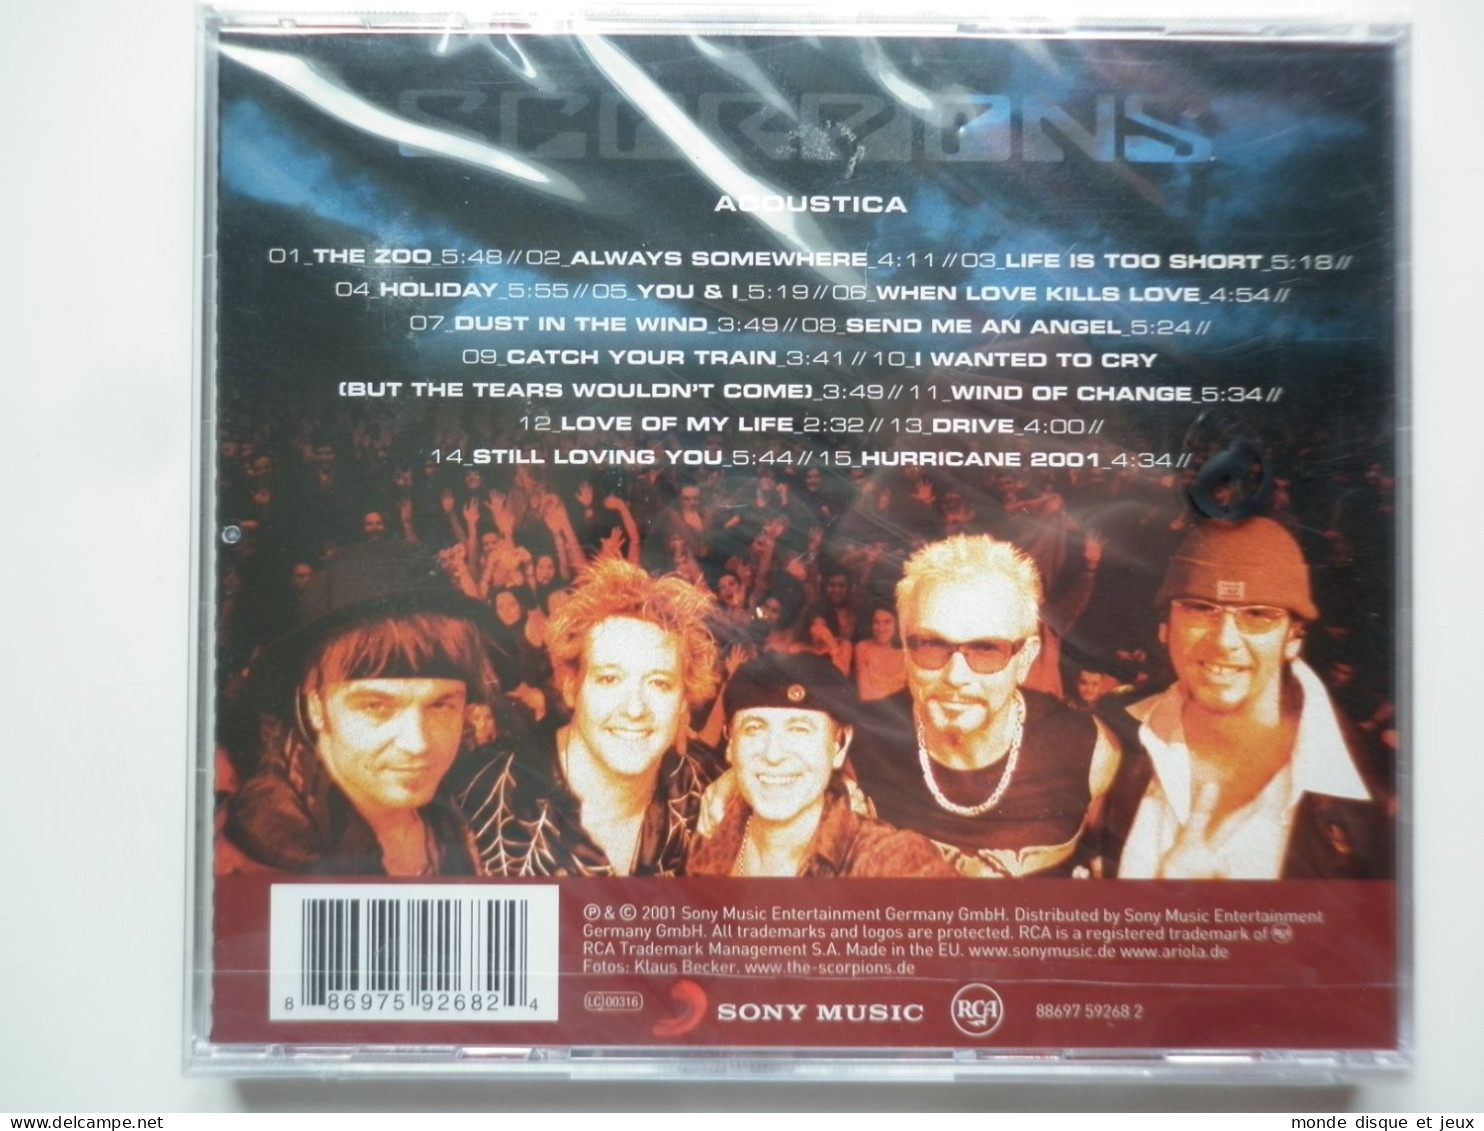 Scorpions Cd Album Acoustica - Other - French Music